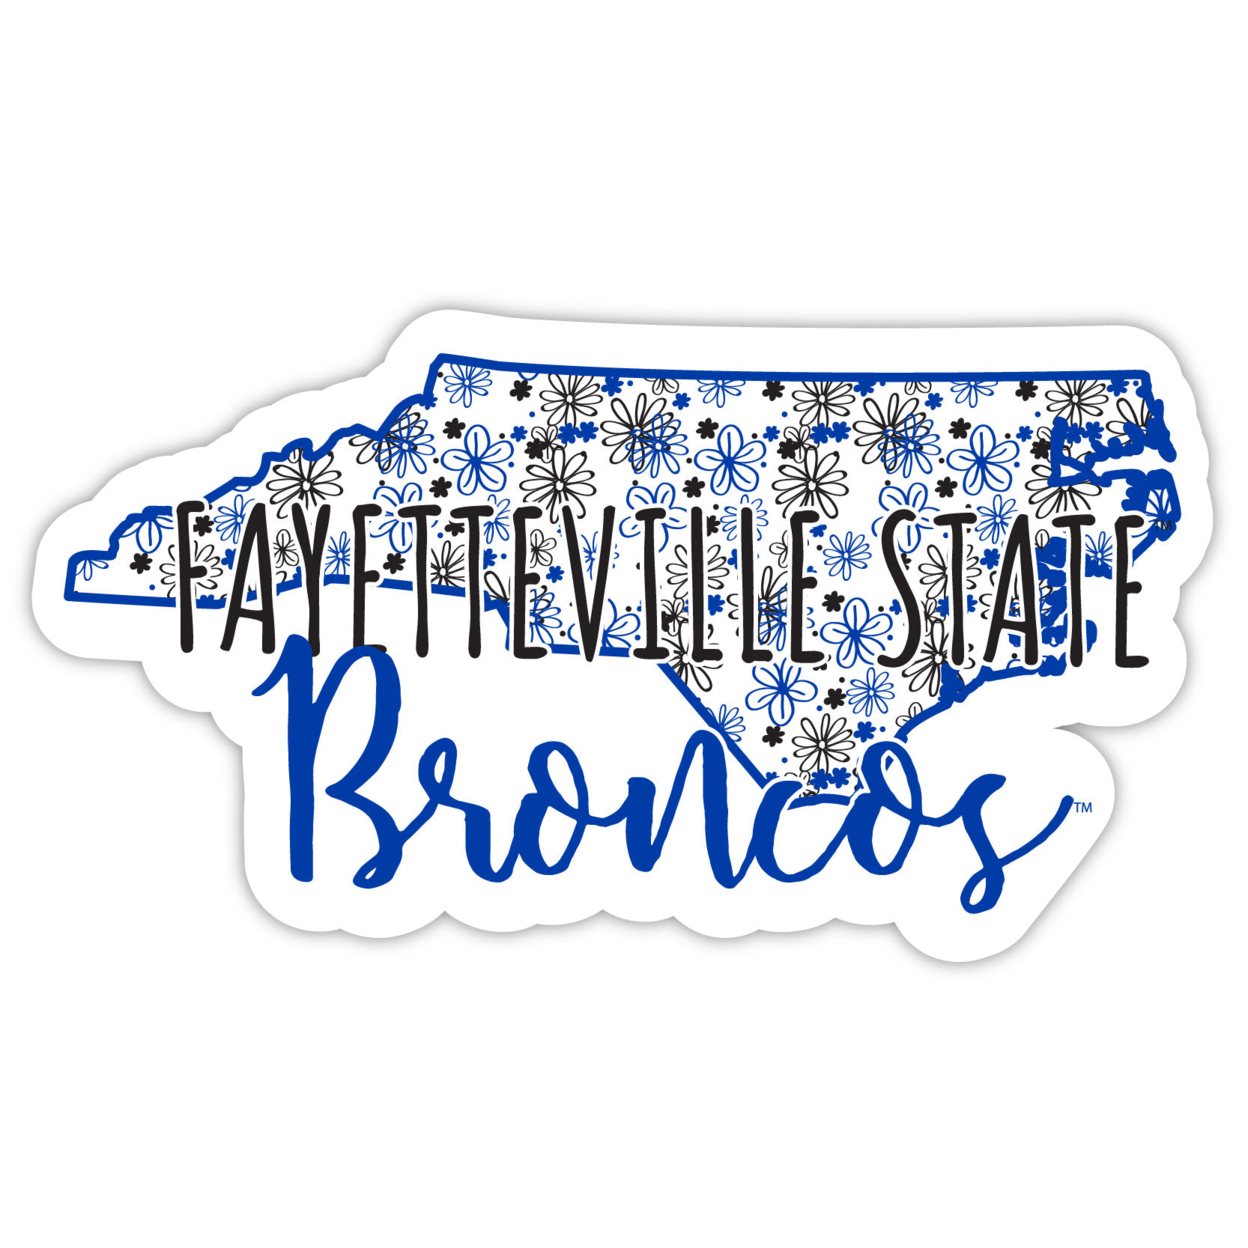 Fayetteville State University Floral State Die Cut Decal 4-Inch